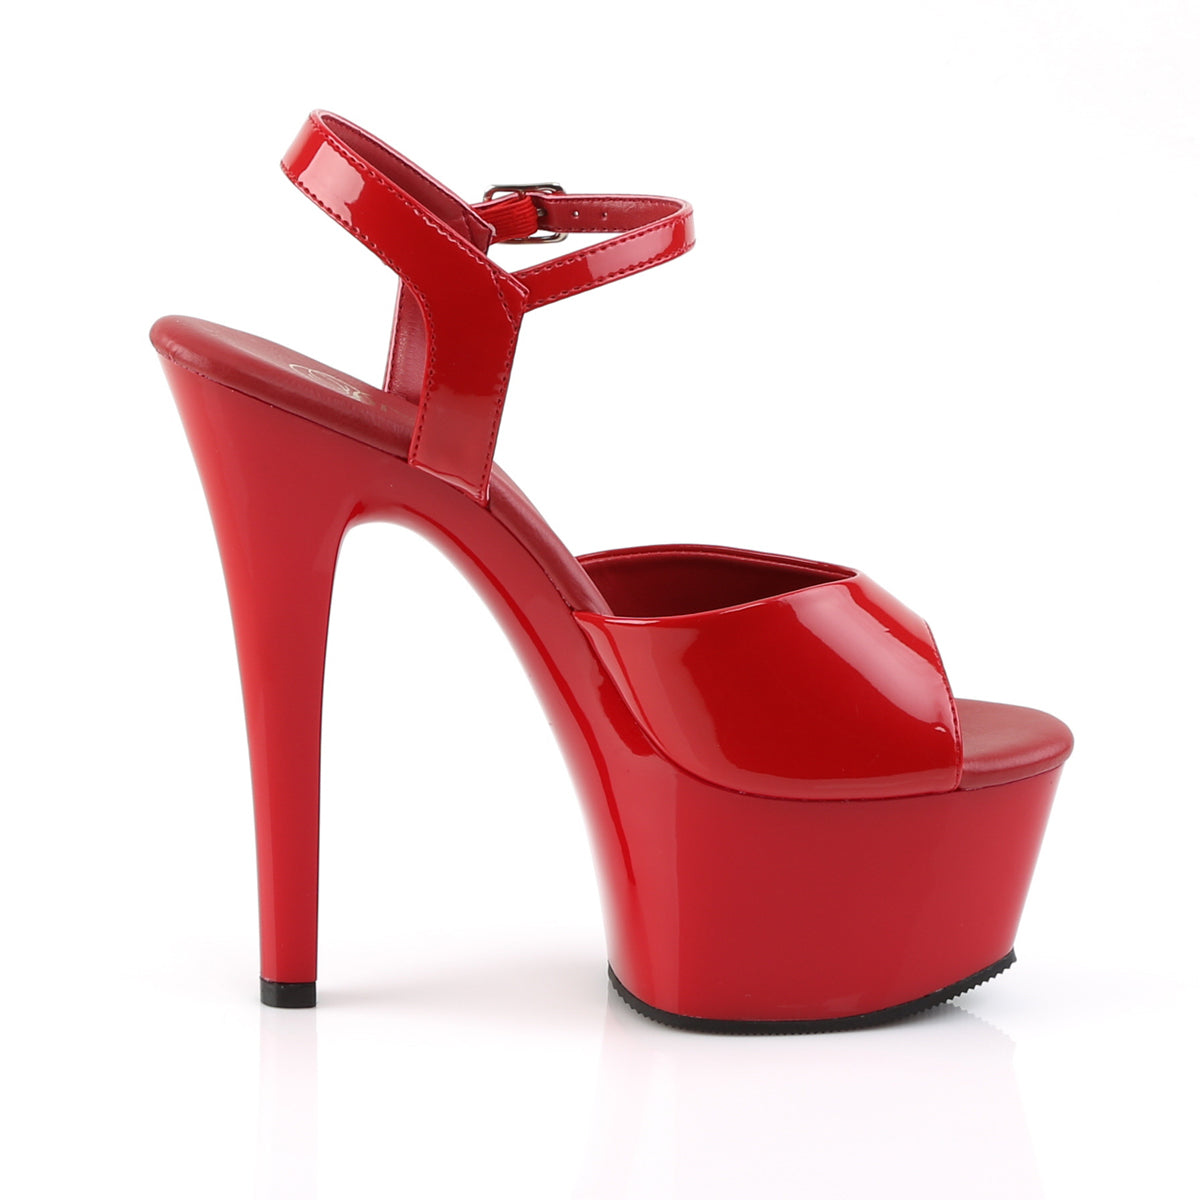 ASPIRE-609 Pleaser 6 Inch Heel Red Pole Dancing Shoes-Pleaser- Sexy Shoes Fetish Heels